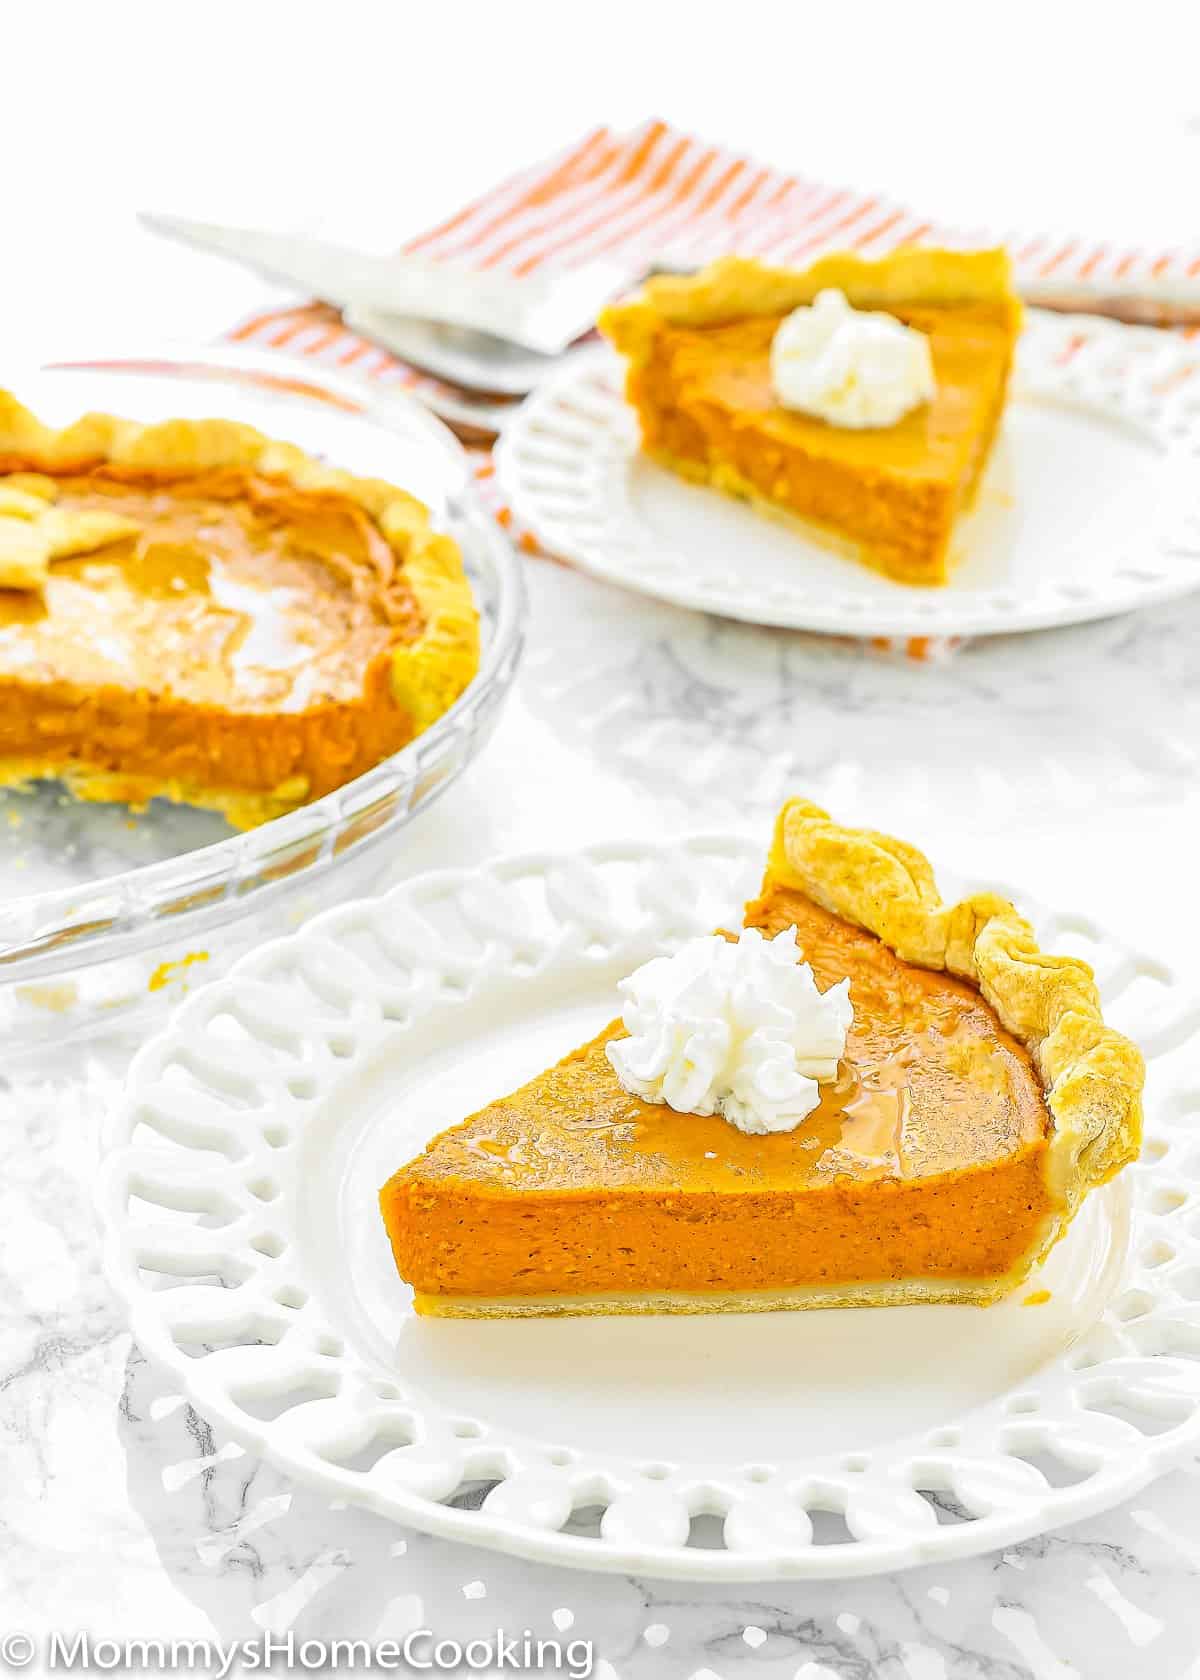 two Eggless Pumpkin Pie slices on white plates over a marble surface